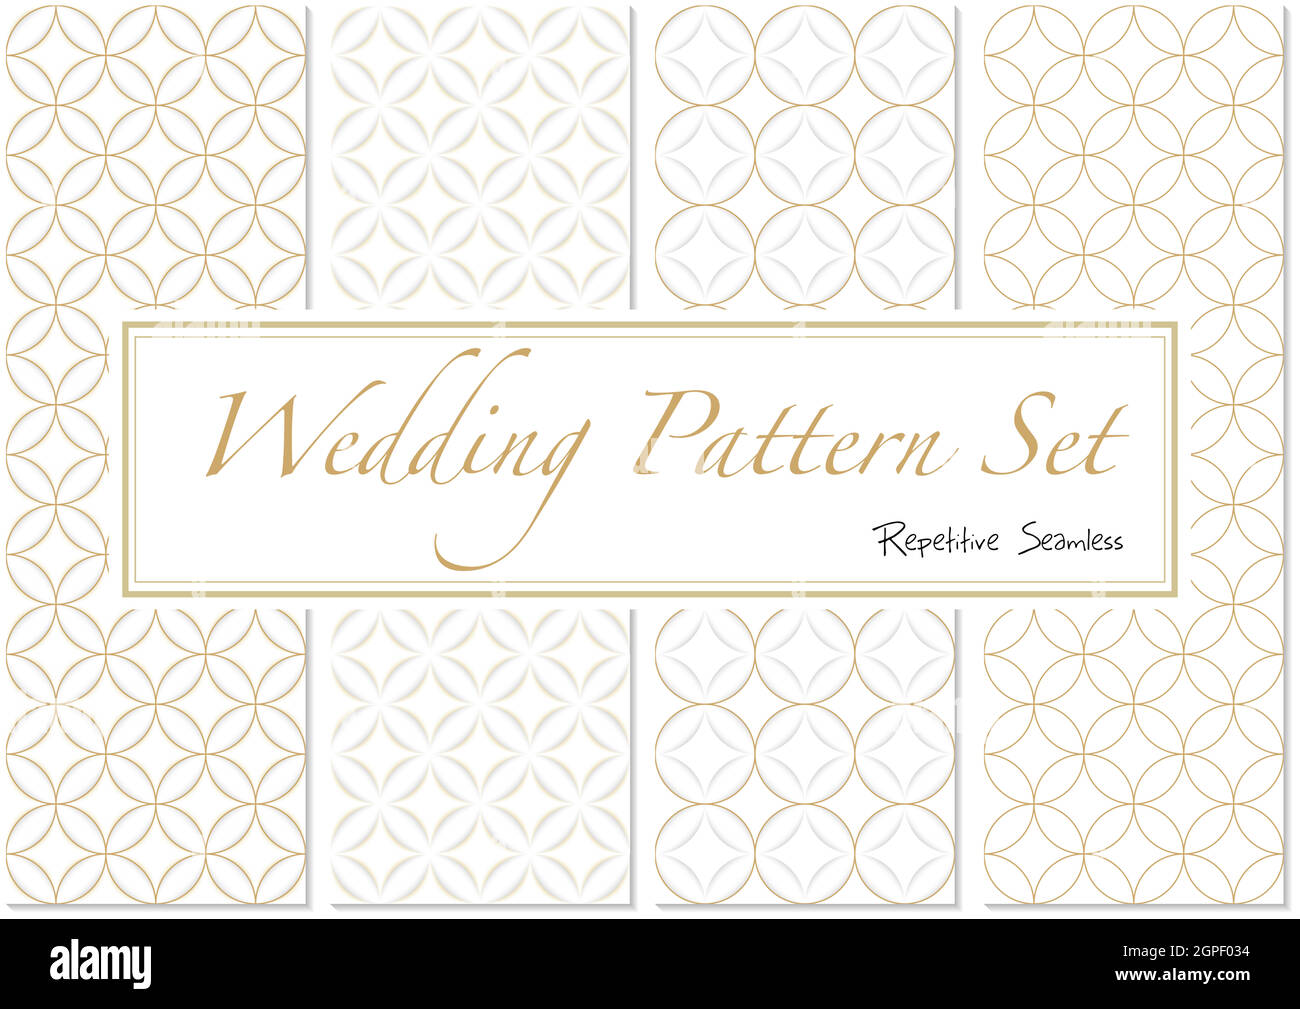 Wedding Patterns in Gold and White Colors Stock Vector